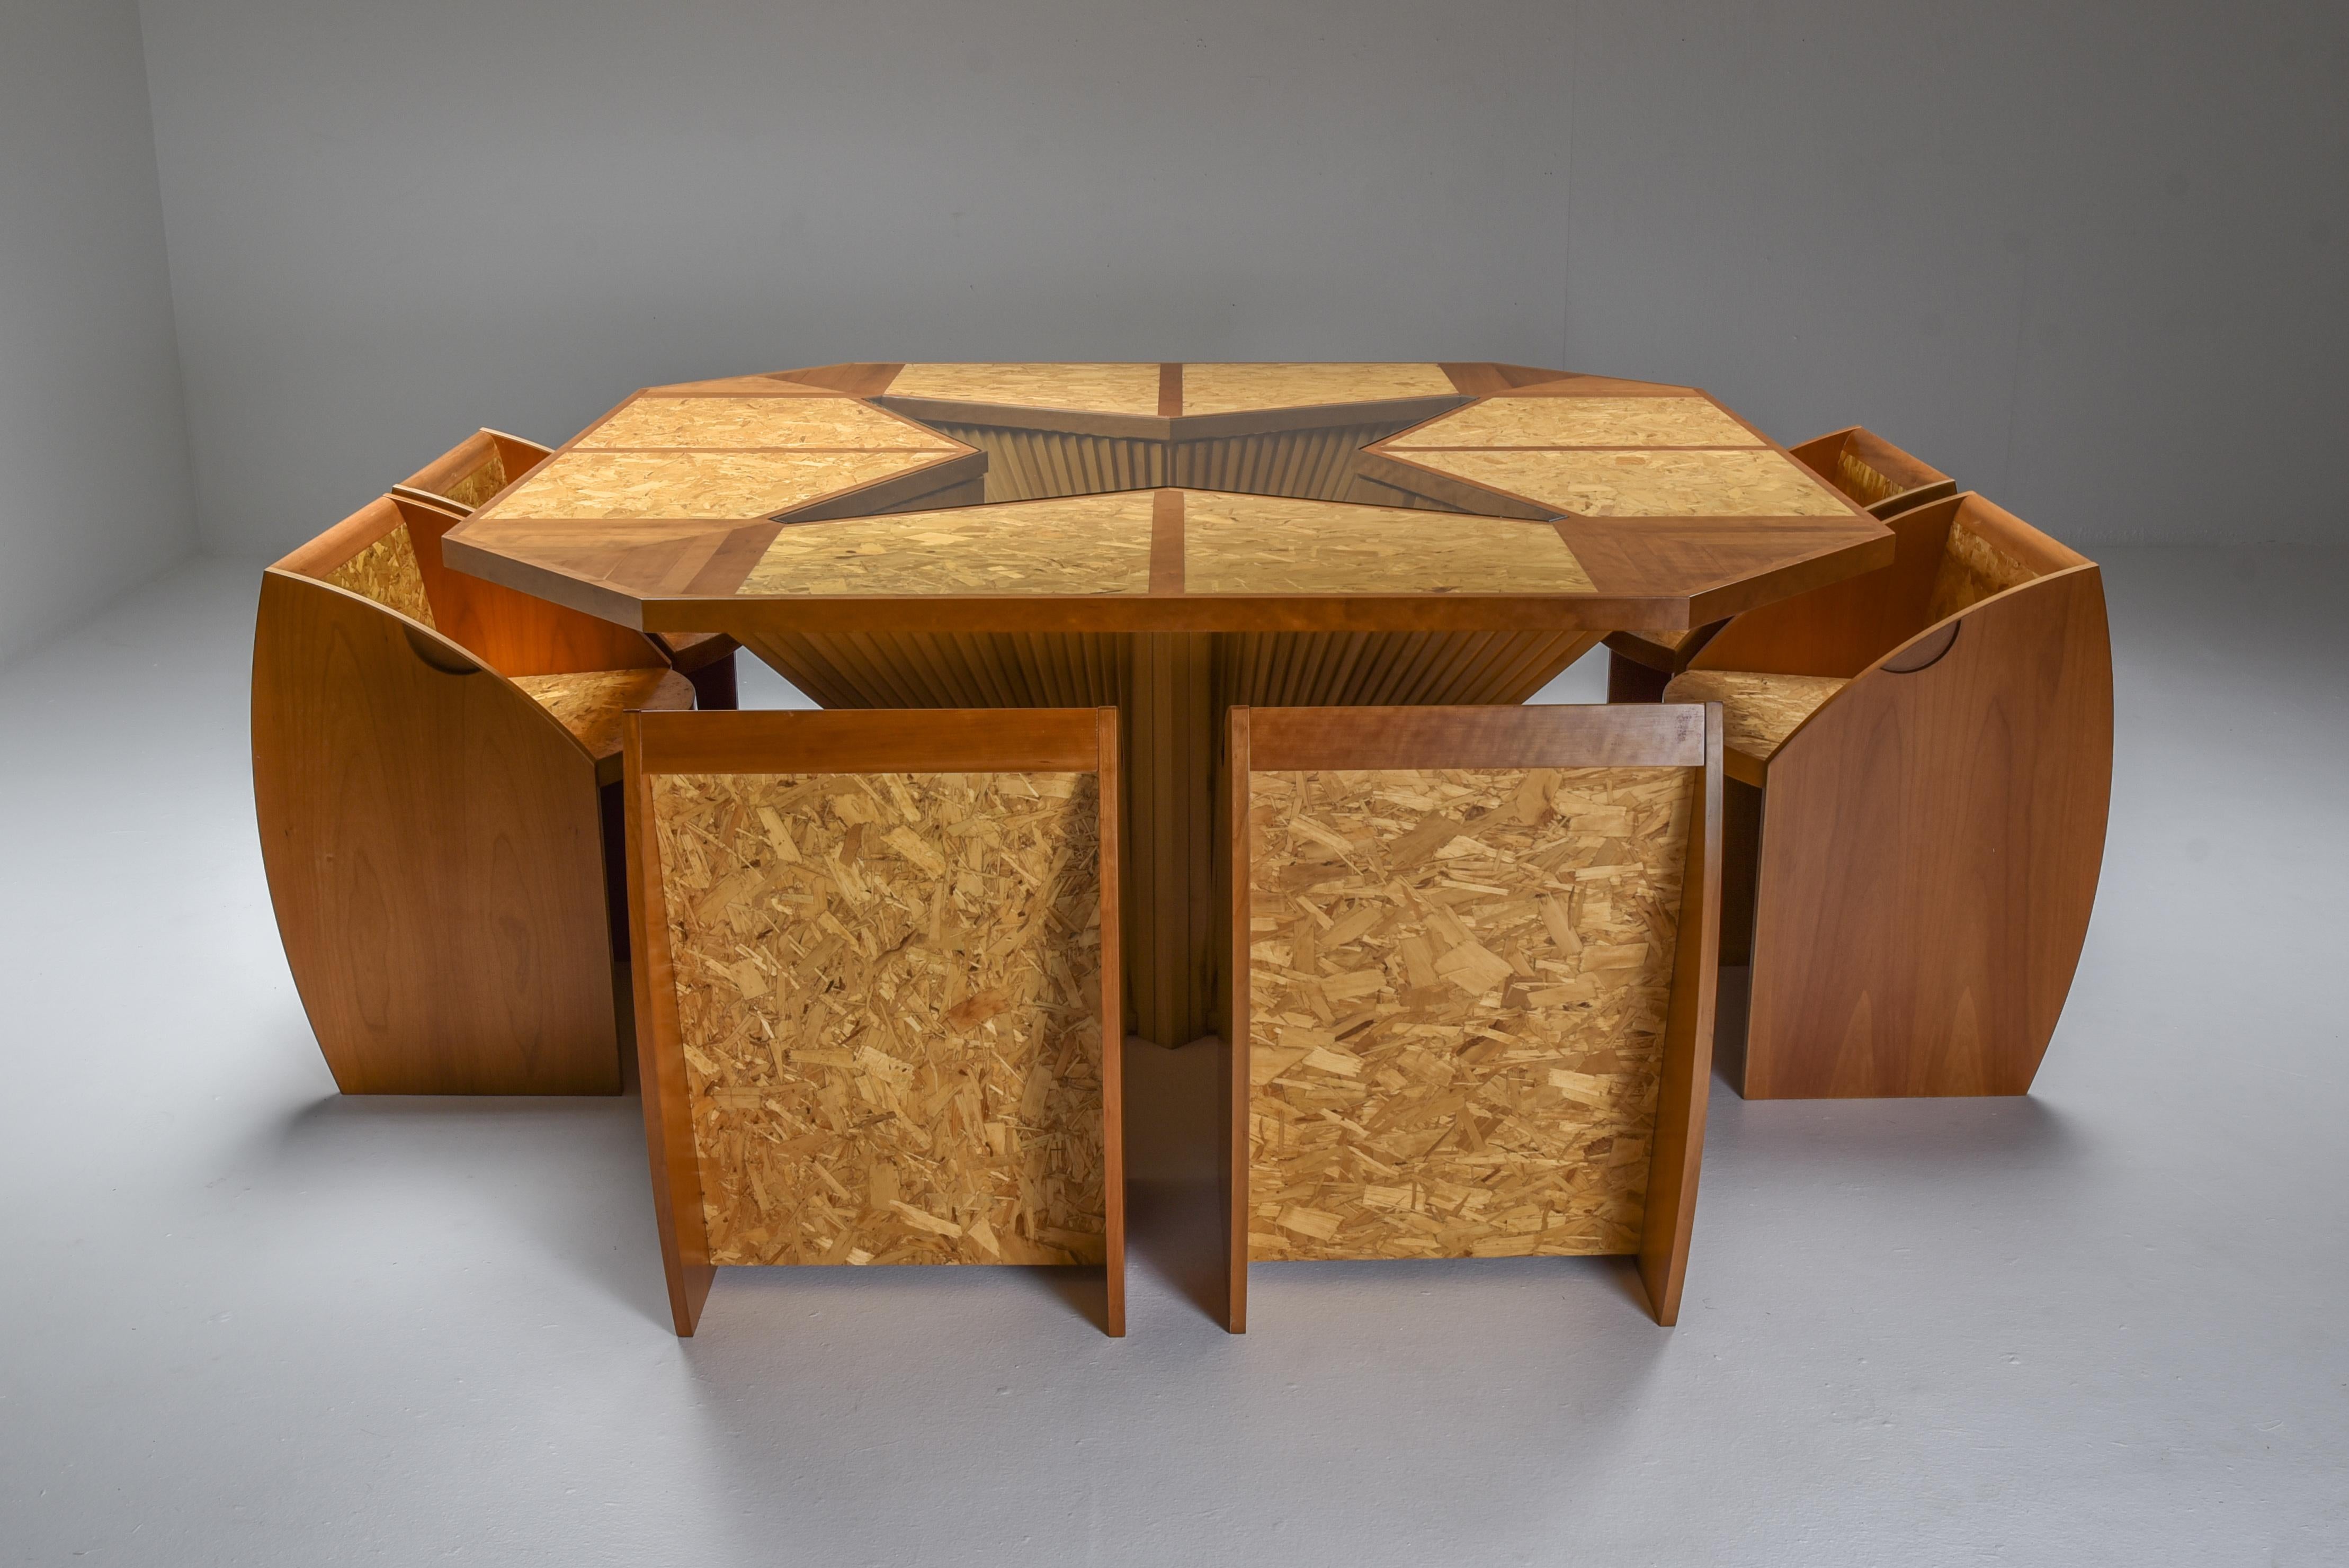 Mid-Century Modern ; Hollywood Regency ; Dining Room Set ; Dining Area ; Dining Chairs ; Dining Table ; Italian Design ; 1970s, Vivai del Sud Inspired ; Wood ; Glass ; Geometric Shape ; 1950s ;

Cet ensemble de salle à manger unique et